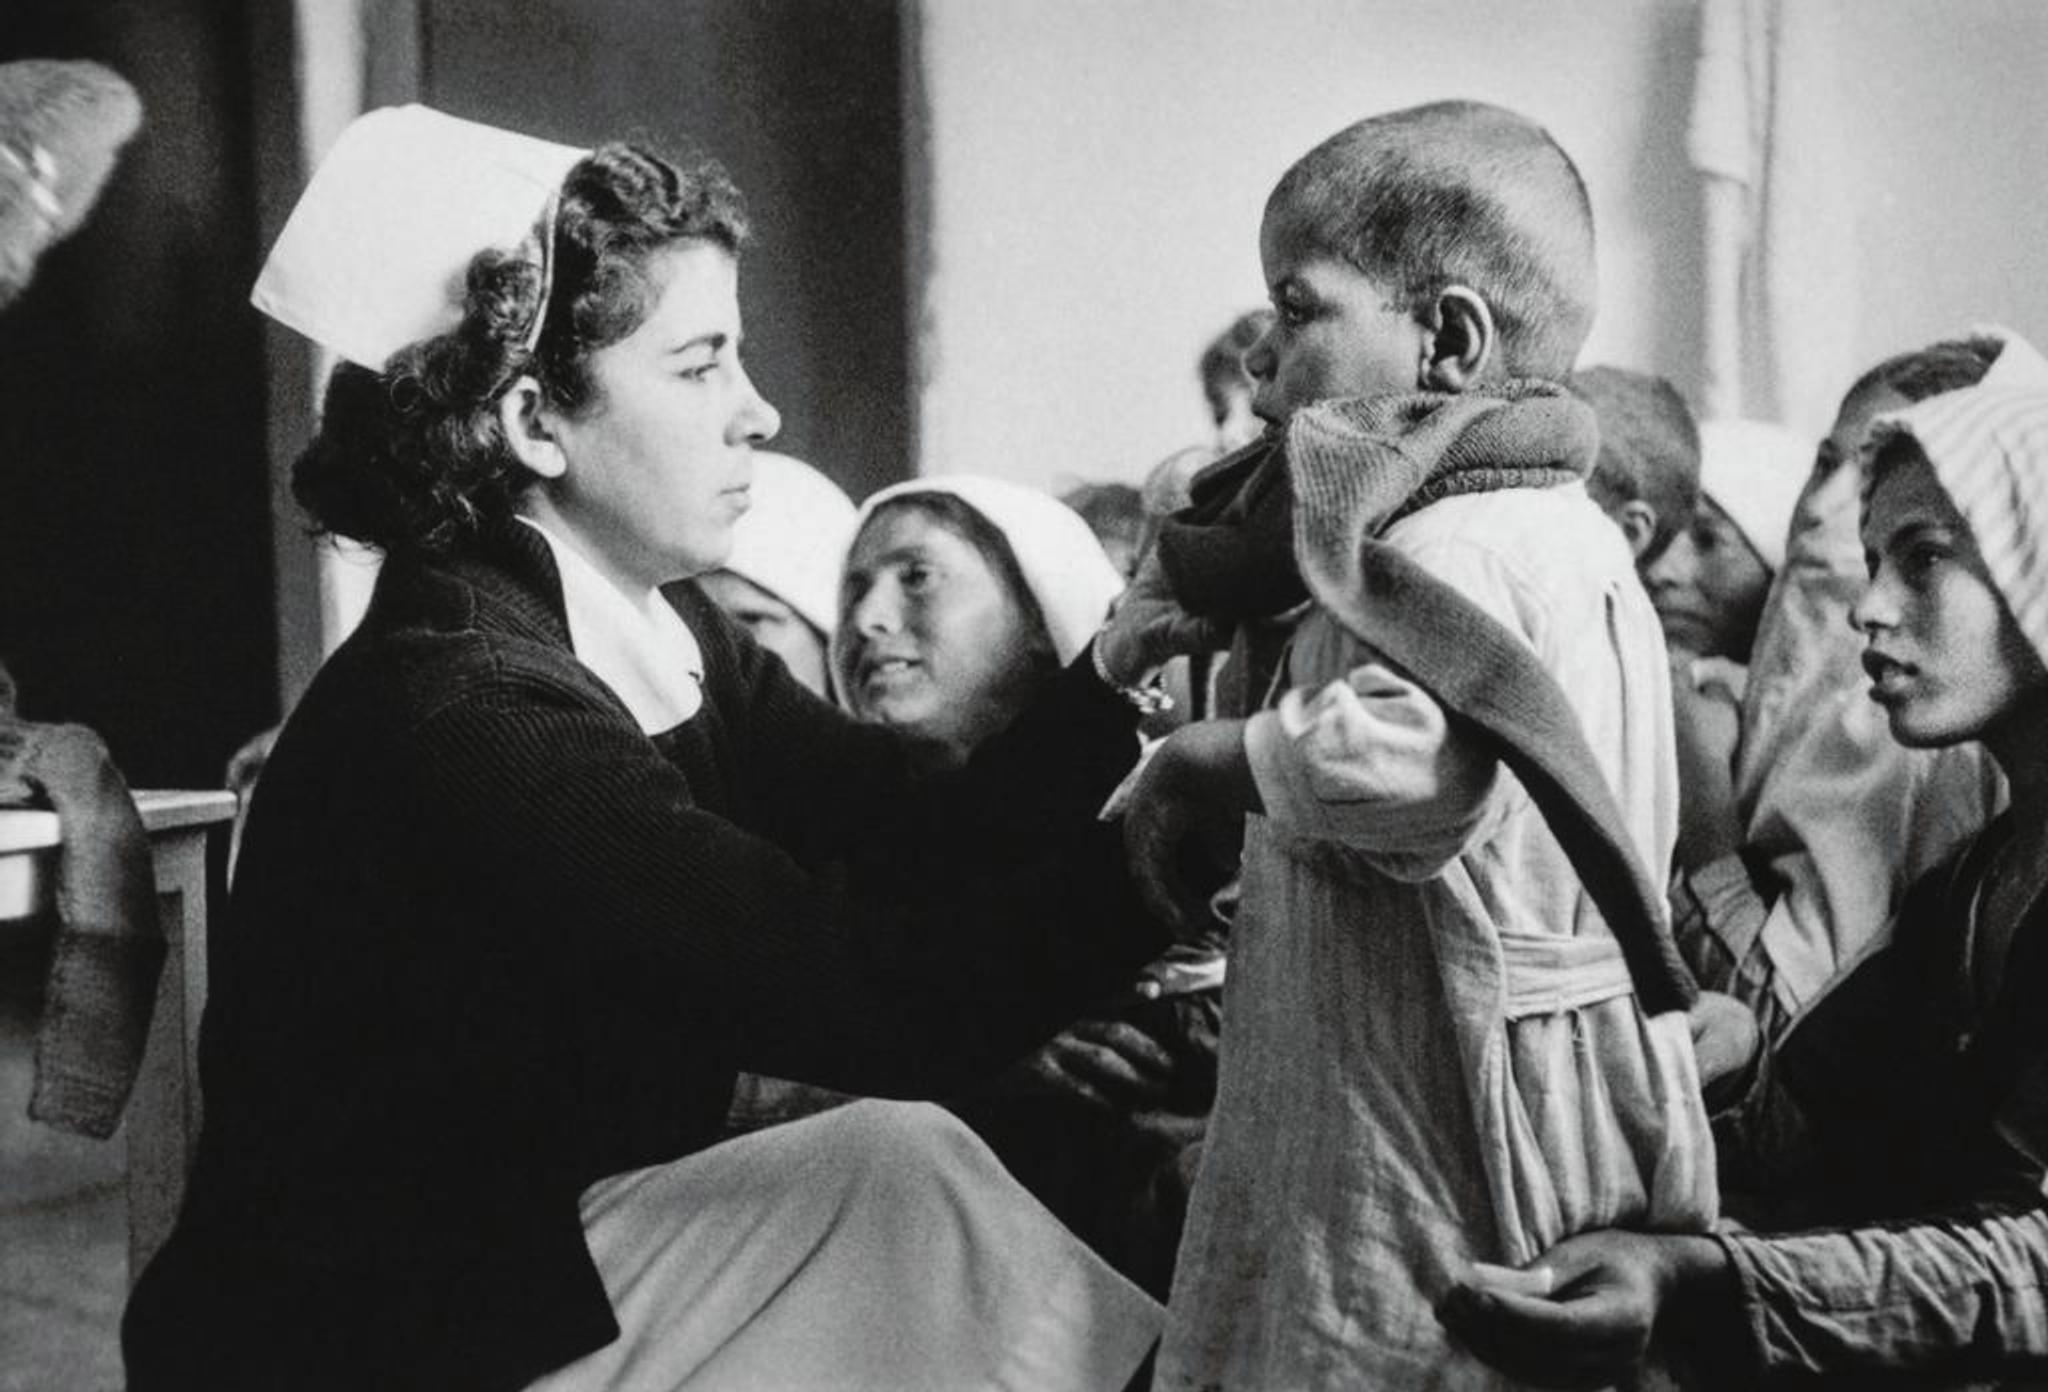 Nurse with a child and a group of women.